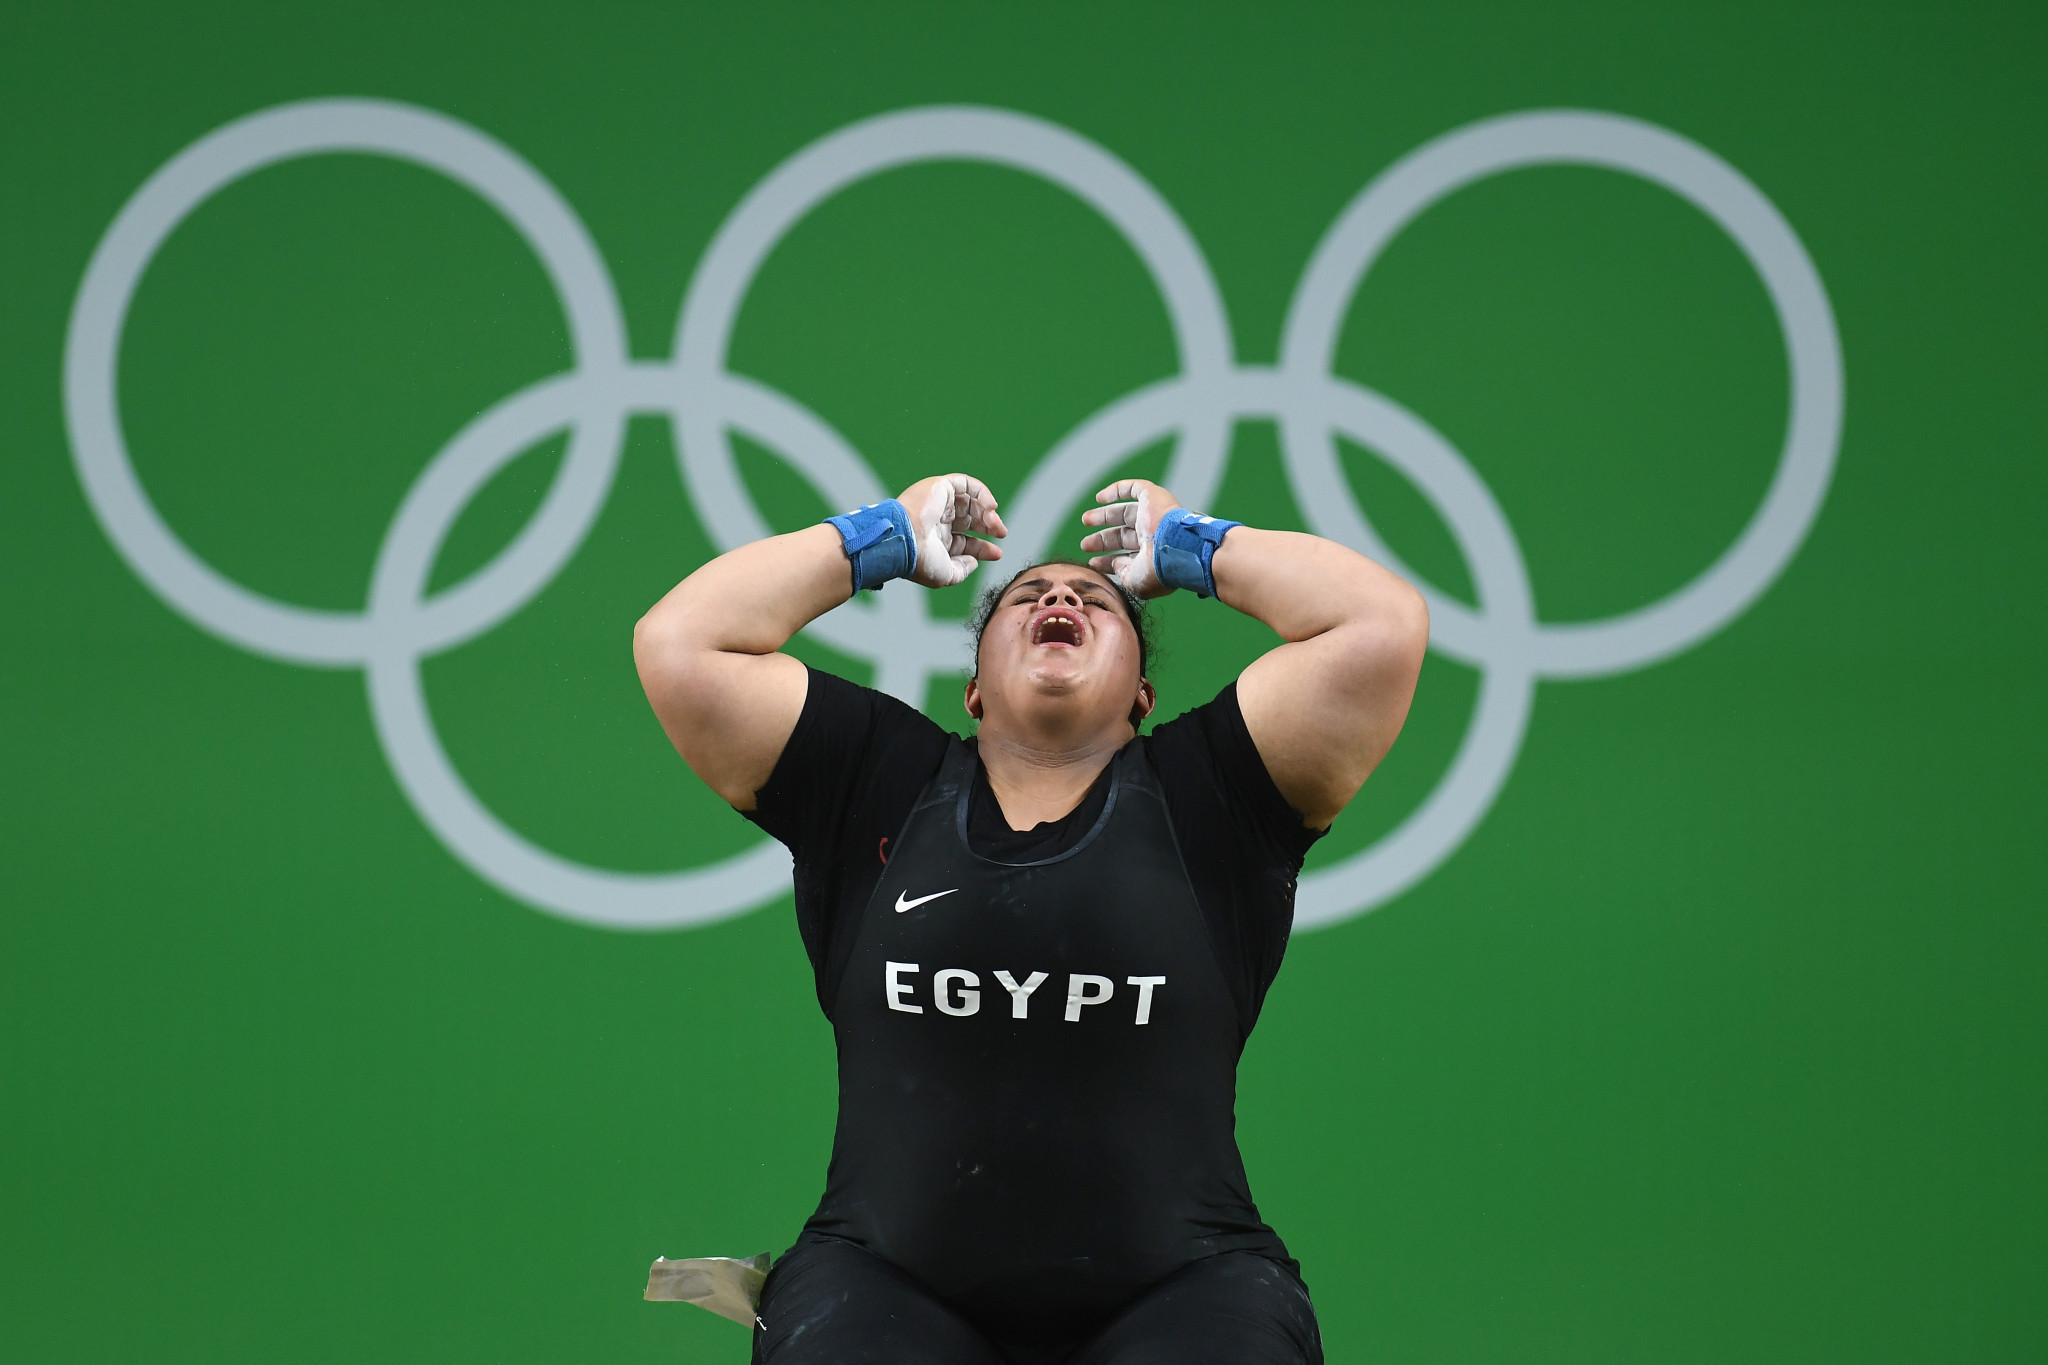 Egypt is among the nations banned from weightlifting at Tokyo 2020 ©Getty Images